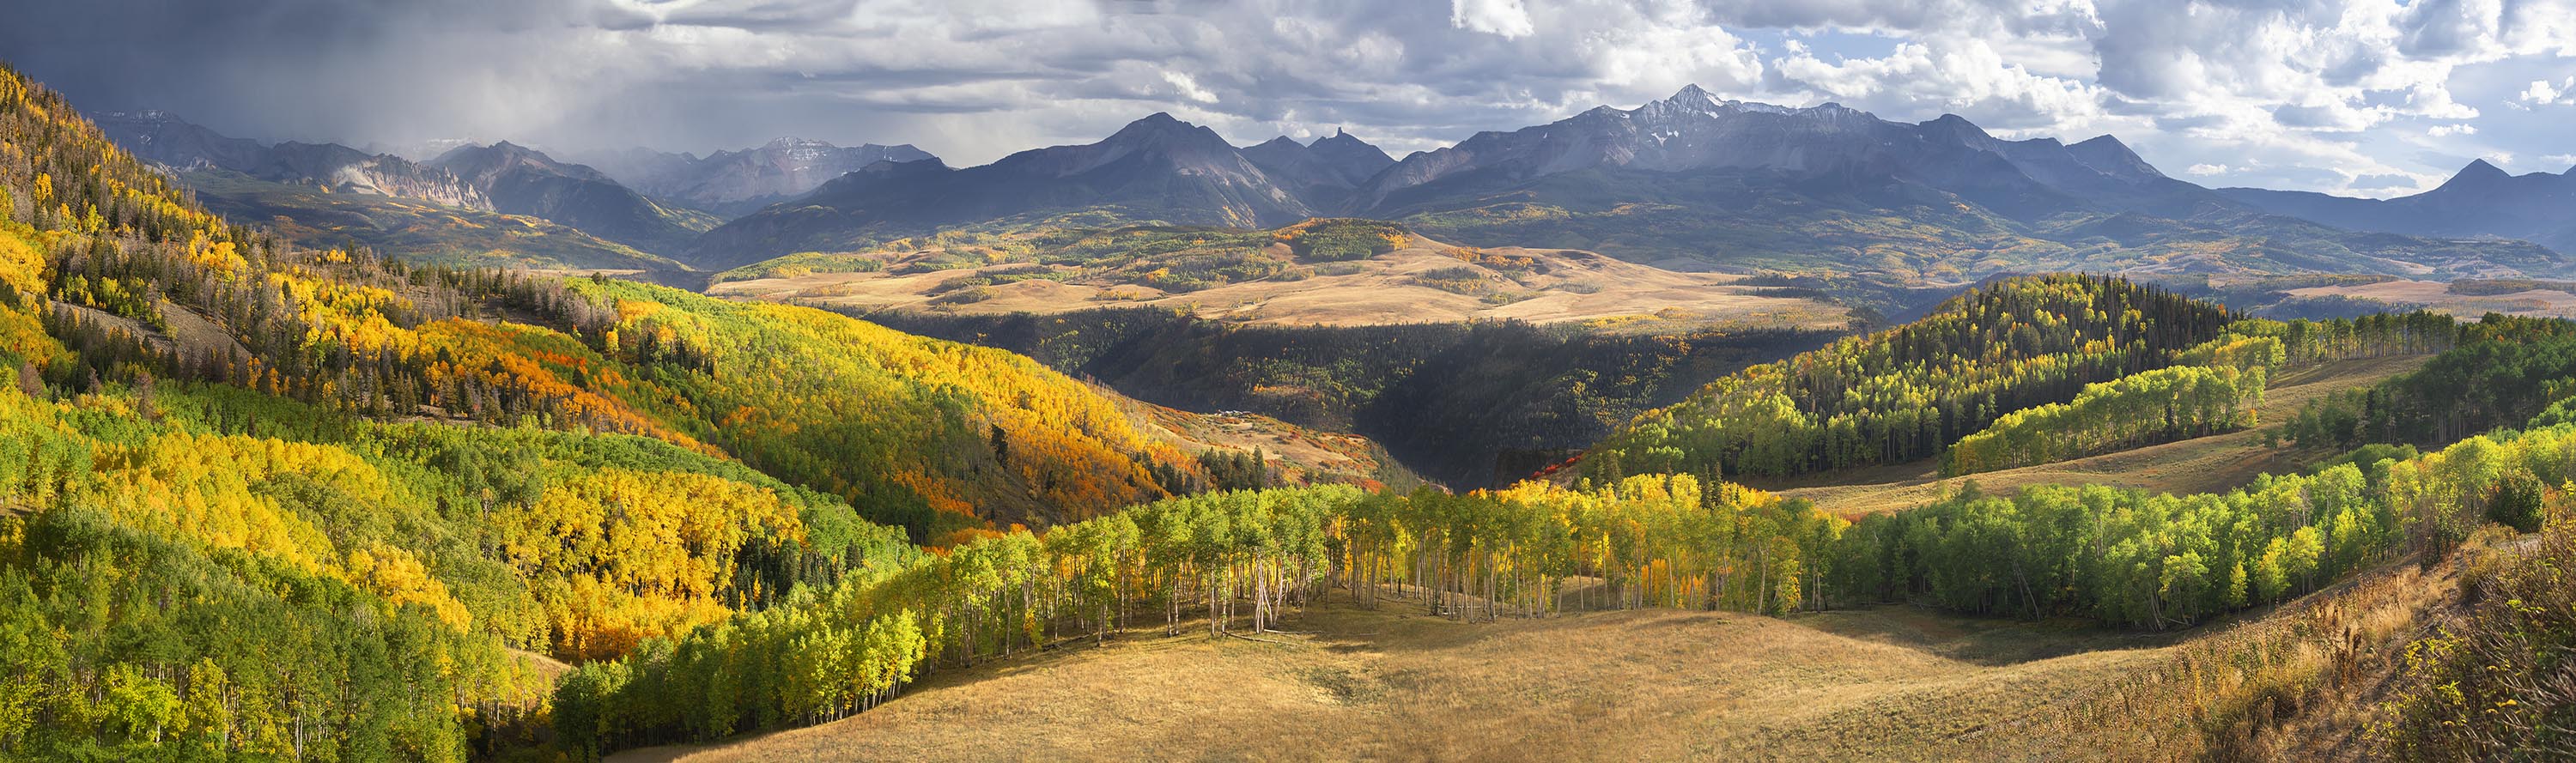 Fall Colorado Mountains, Hills, and Colorful Aspens